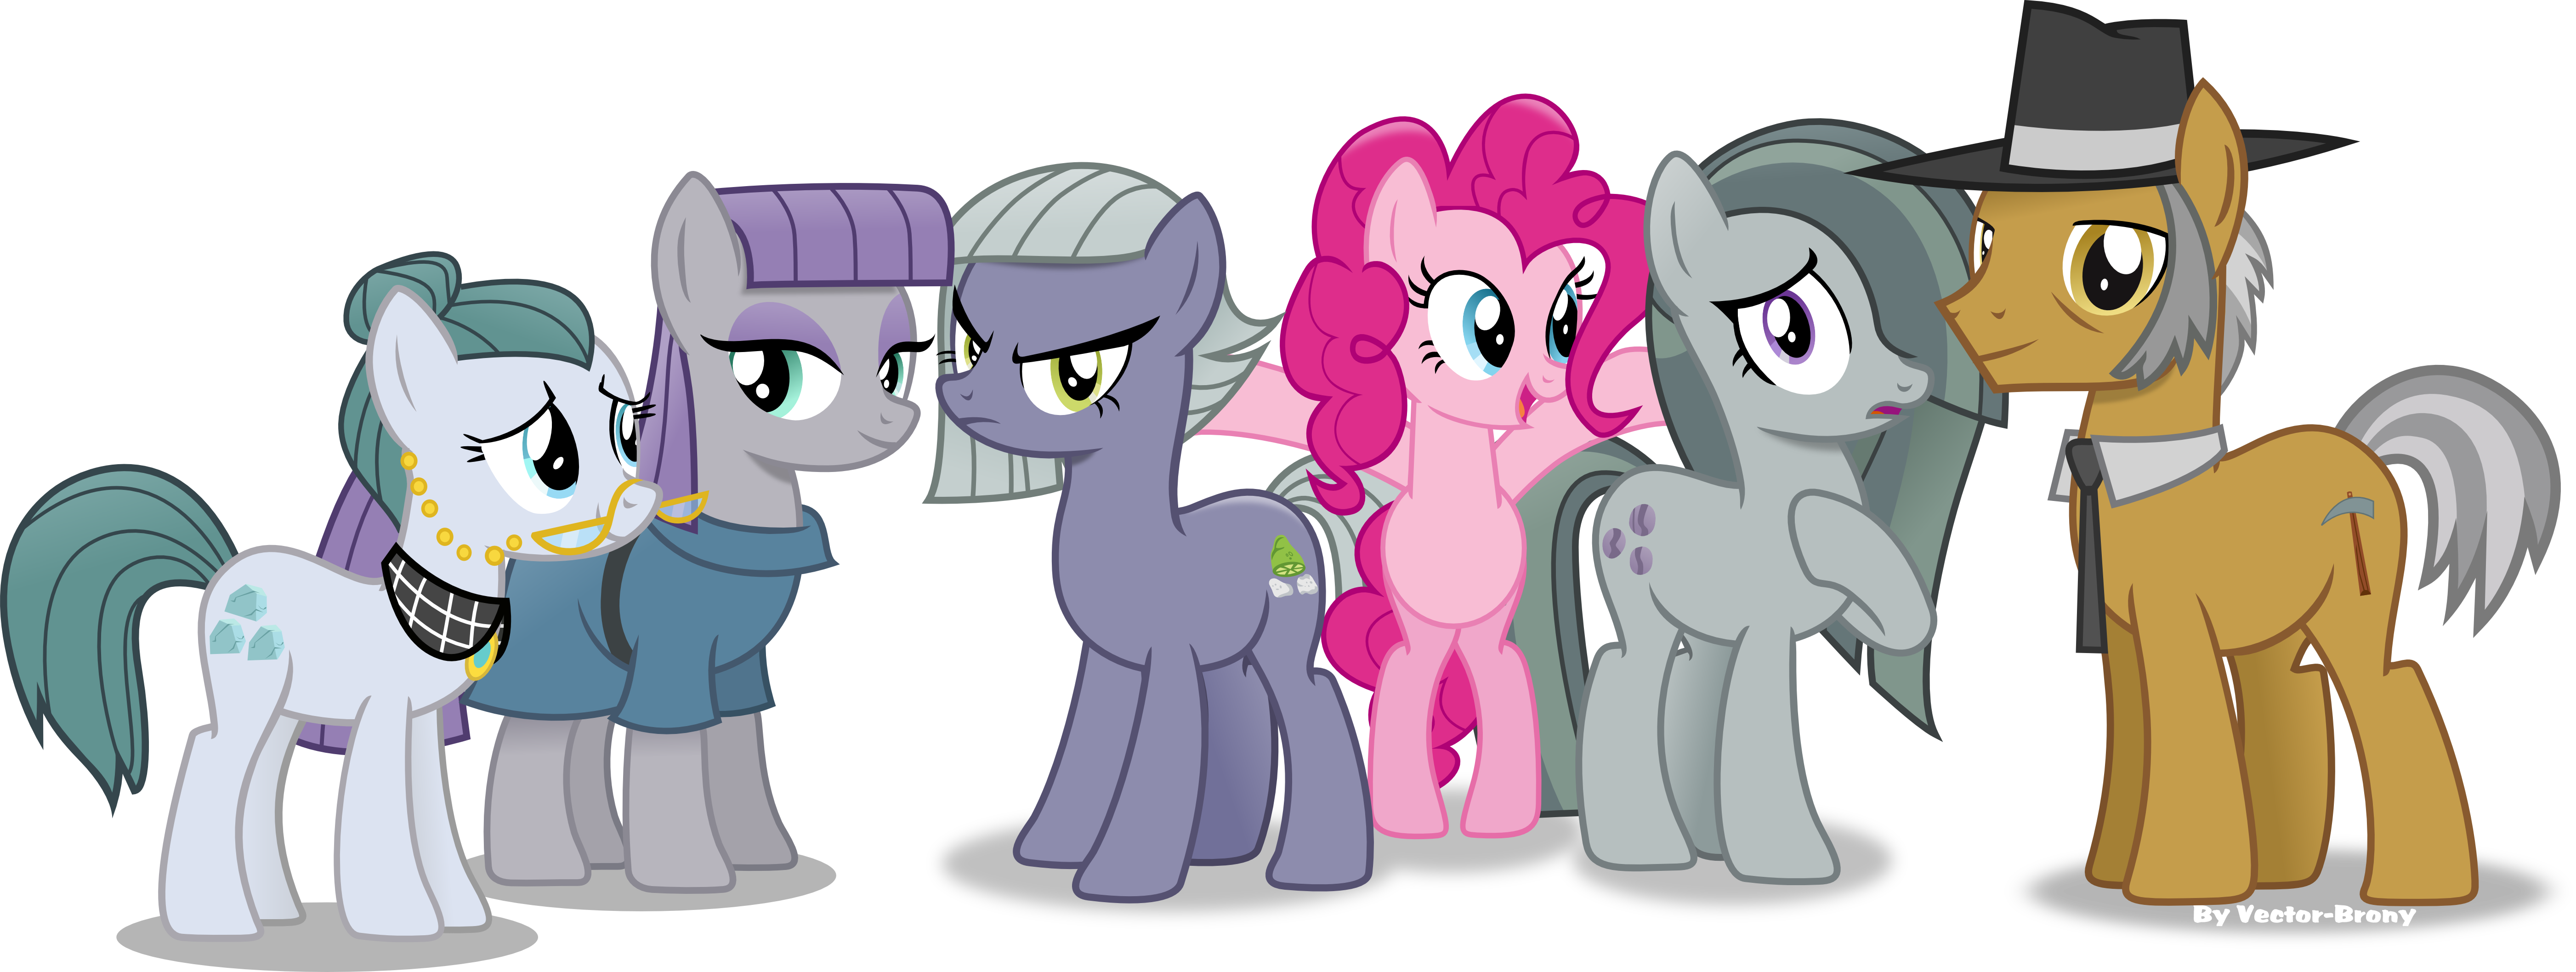 pinkie_pie_s_family_revised_revised_by_v